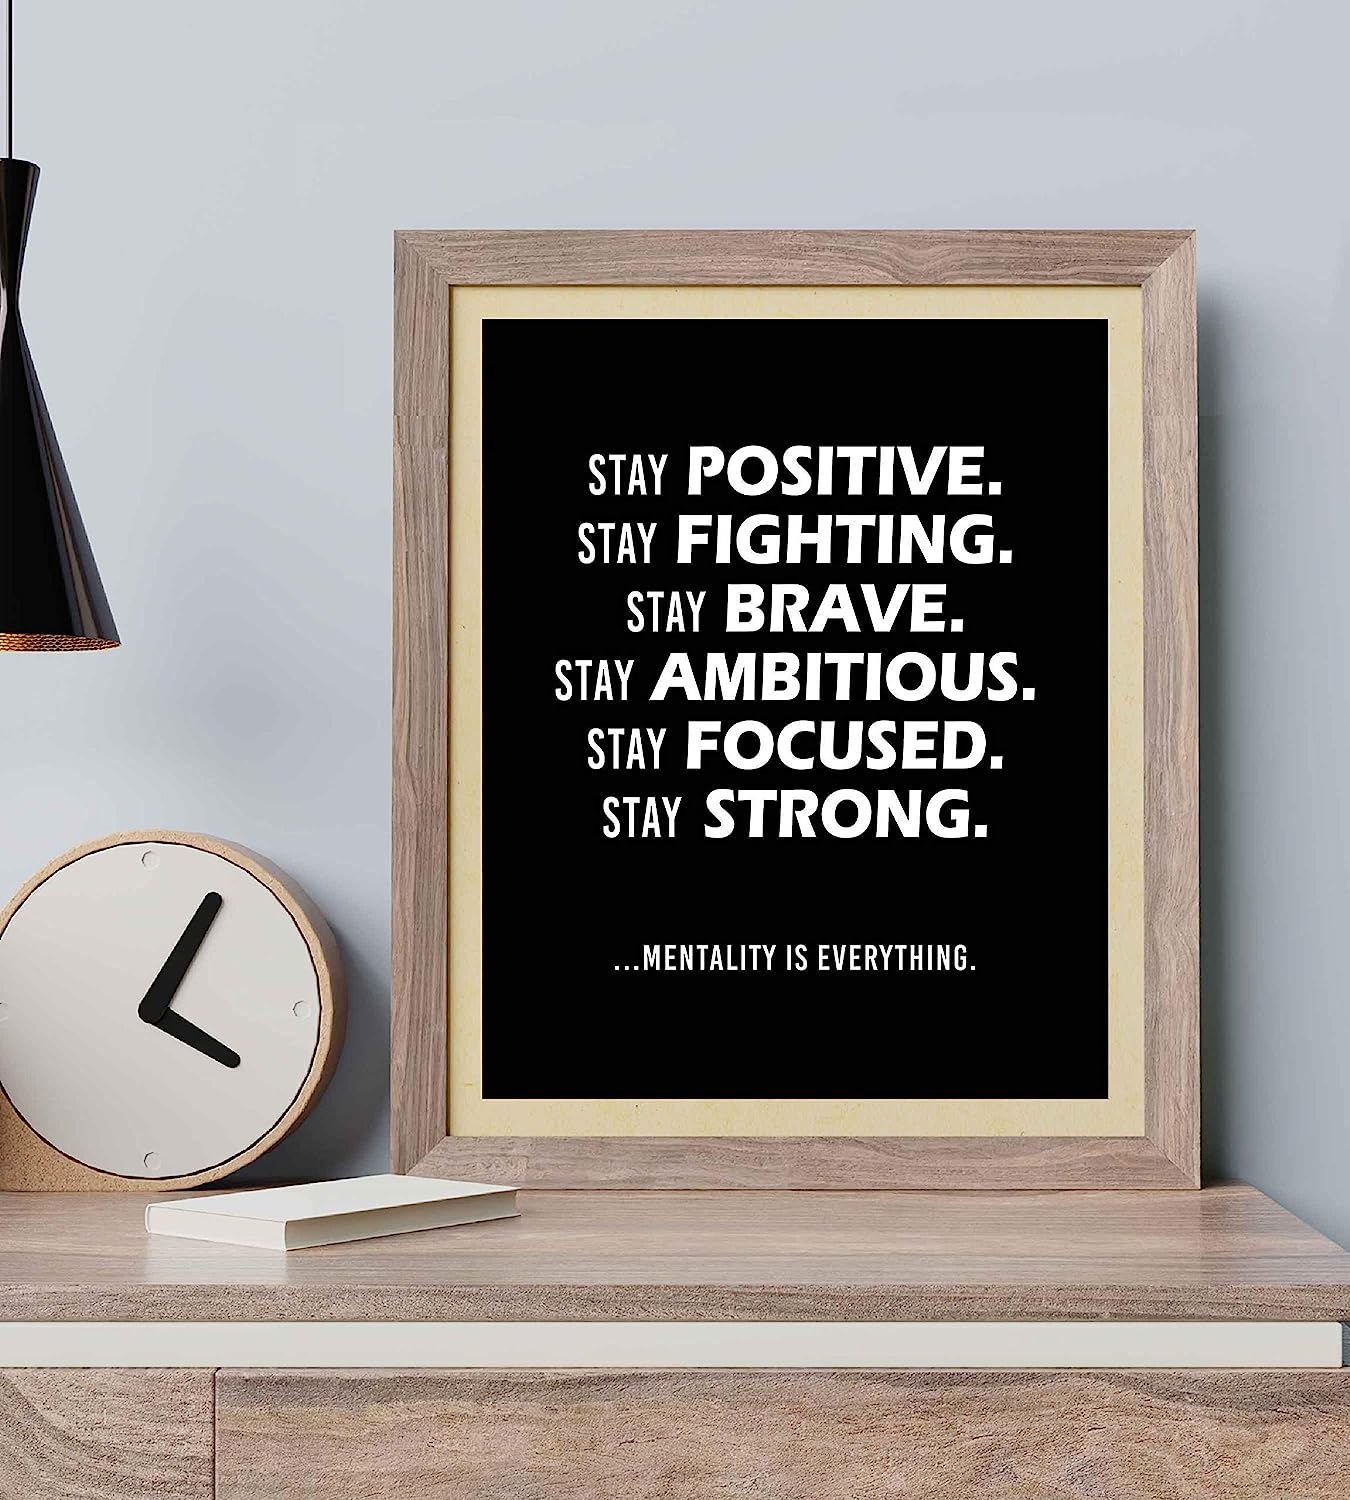 Stay Positive-Mentality Is Everything-Life Quotes Wall Art-8 x 10" Motivational Poster Print-Ready To Frame. Inspirational Home-Office-Classroom Decor. Perfect Desk Sign! Reminder-Be Positive!